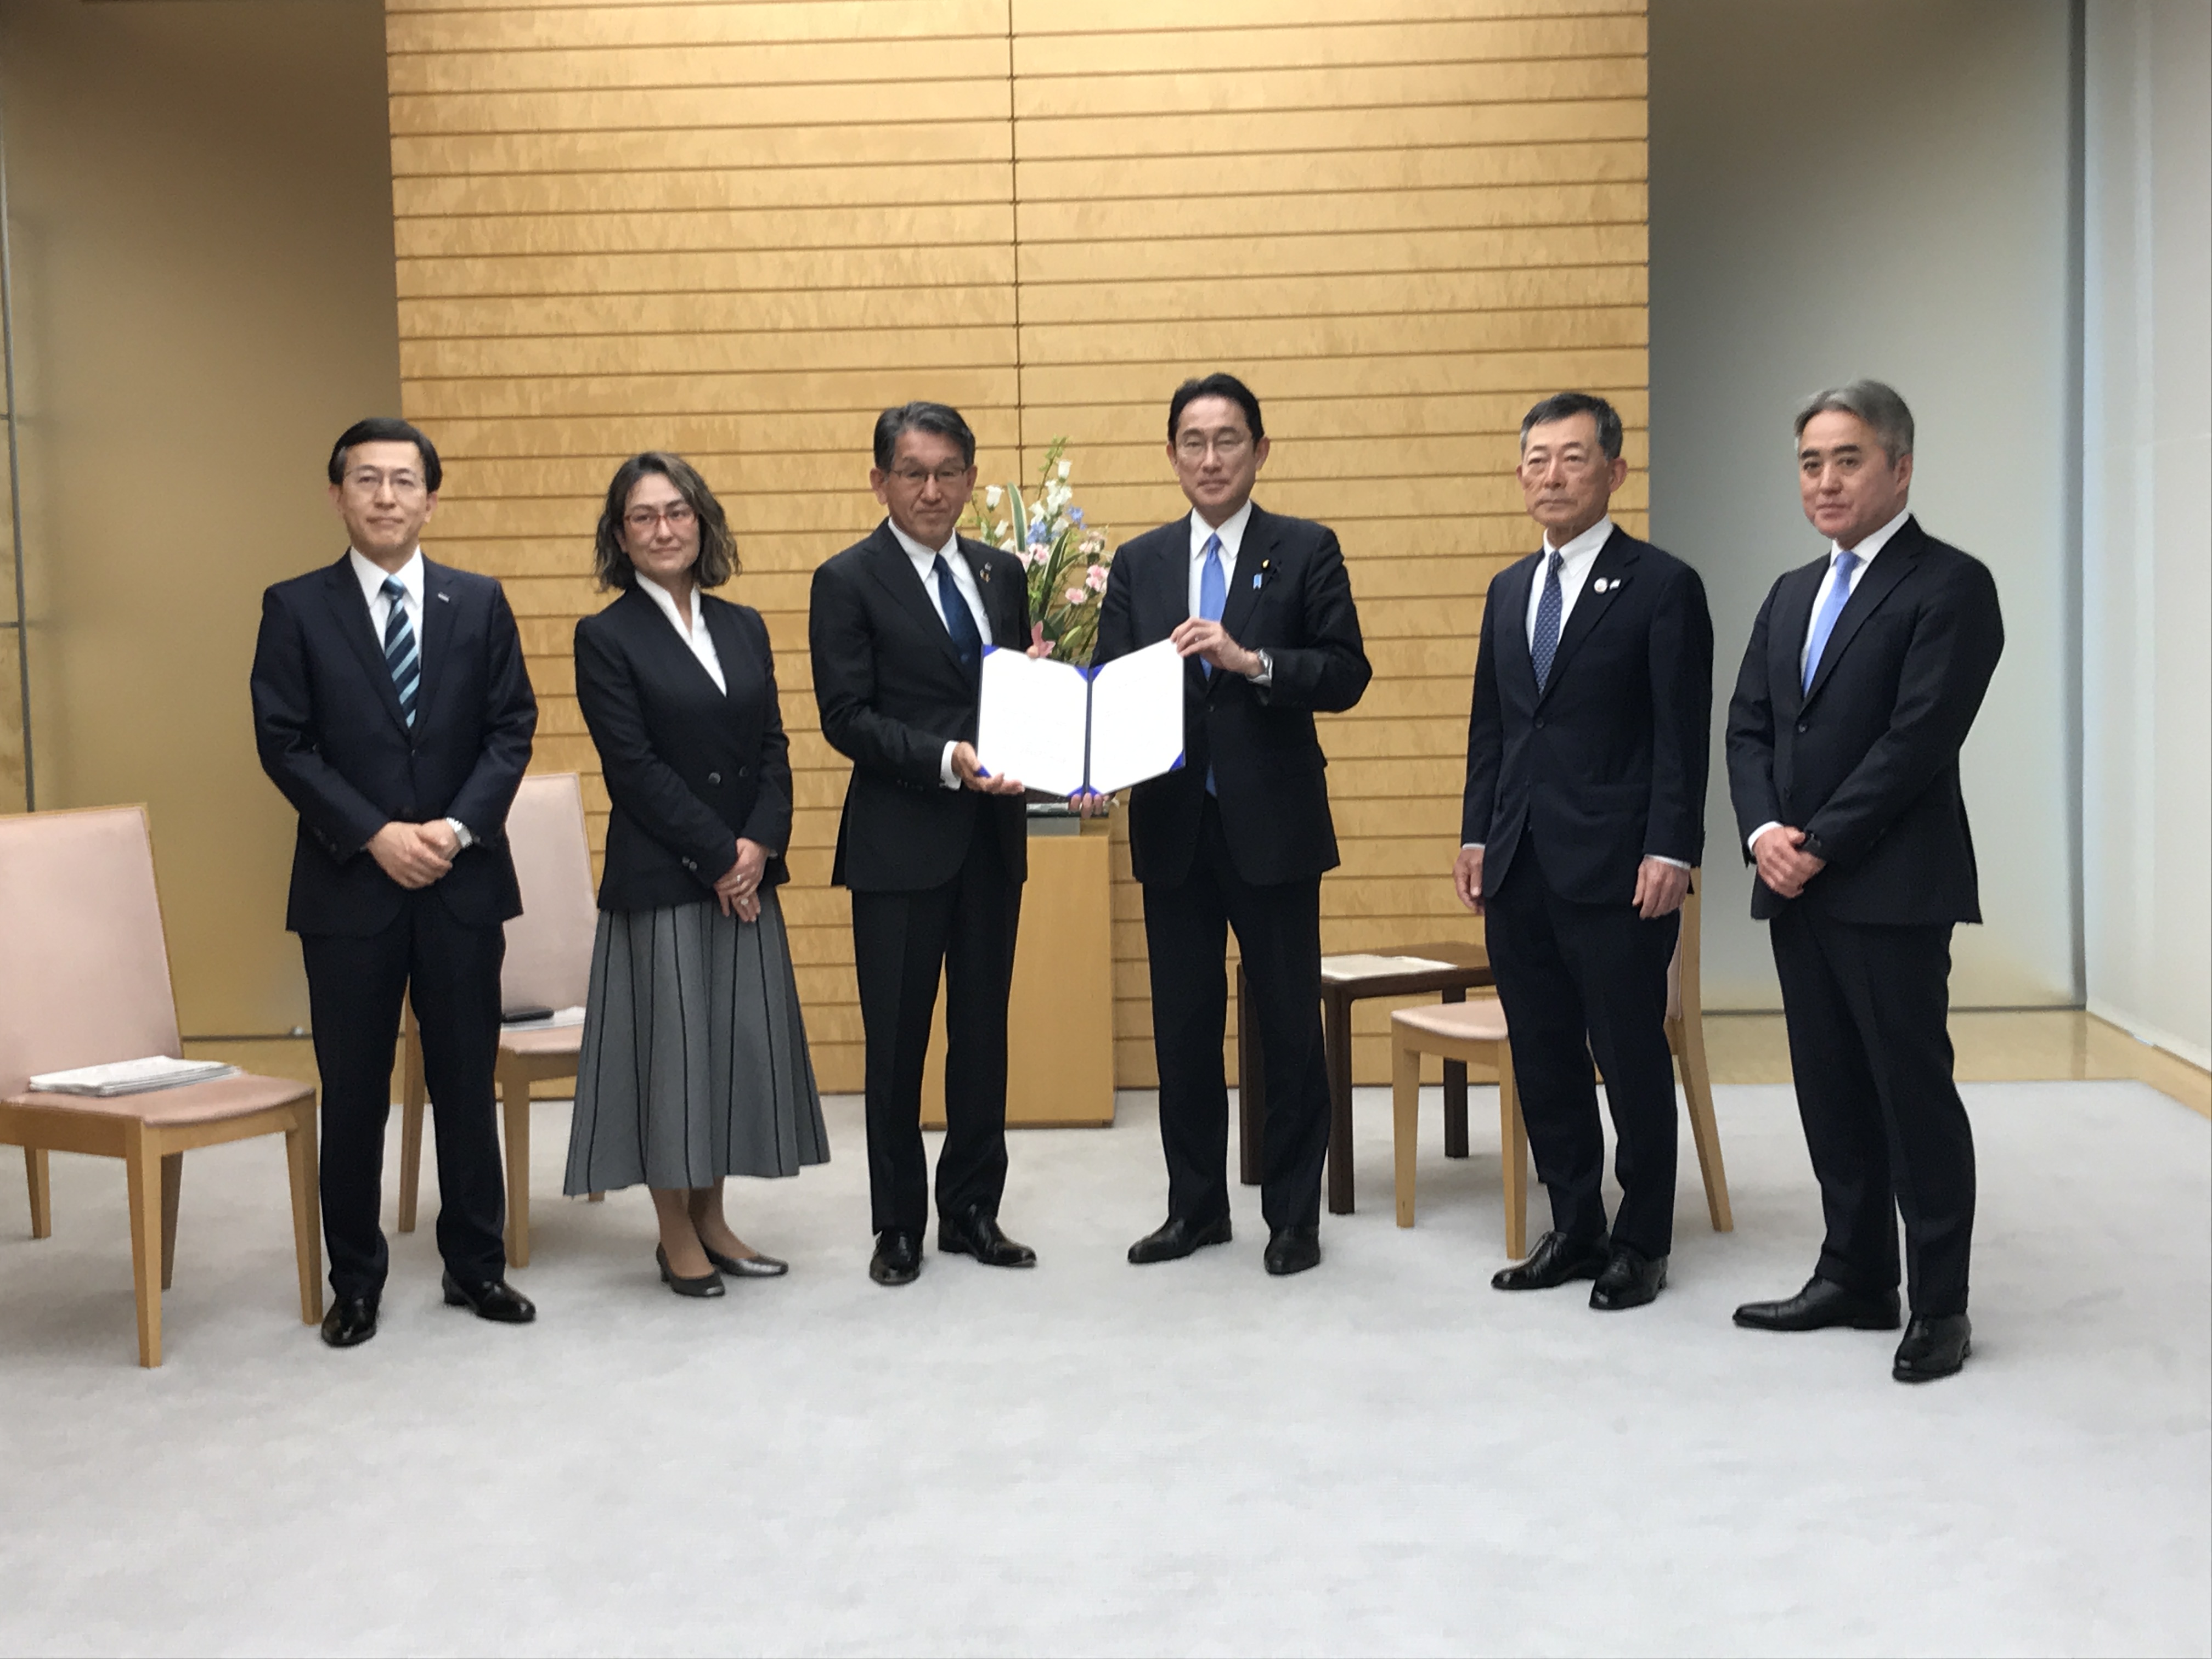 Ricoh President & CEO hands policy proposal on climate crisis to the Prime Minister of Japan as Co-chair of JCLP